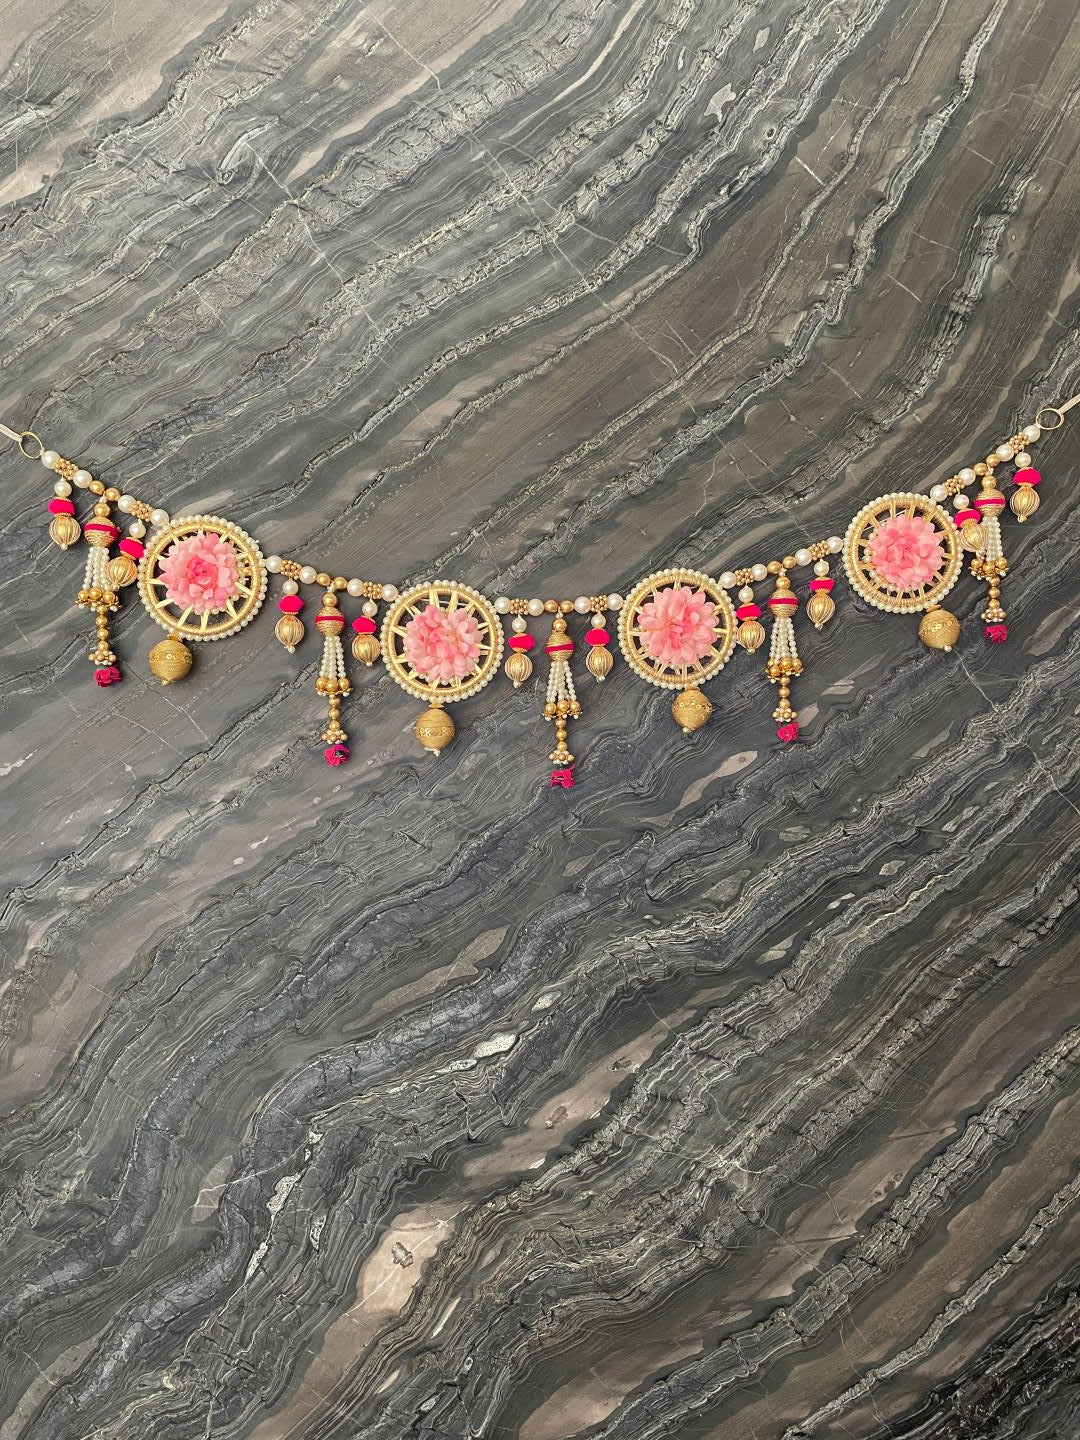 Pink Flower Toran For Door Hangings Diwali Decoration with Pearl & Gold